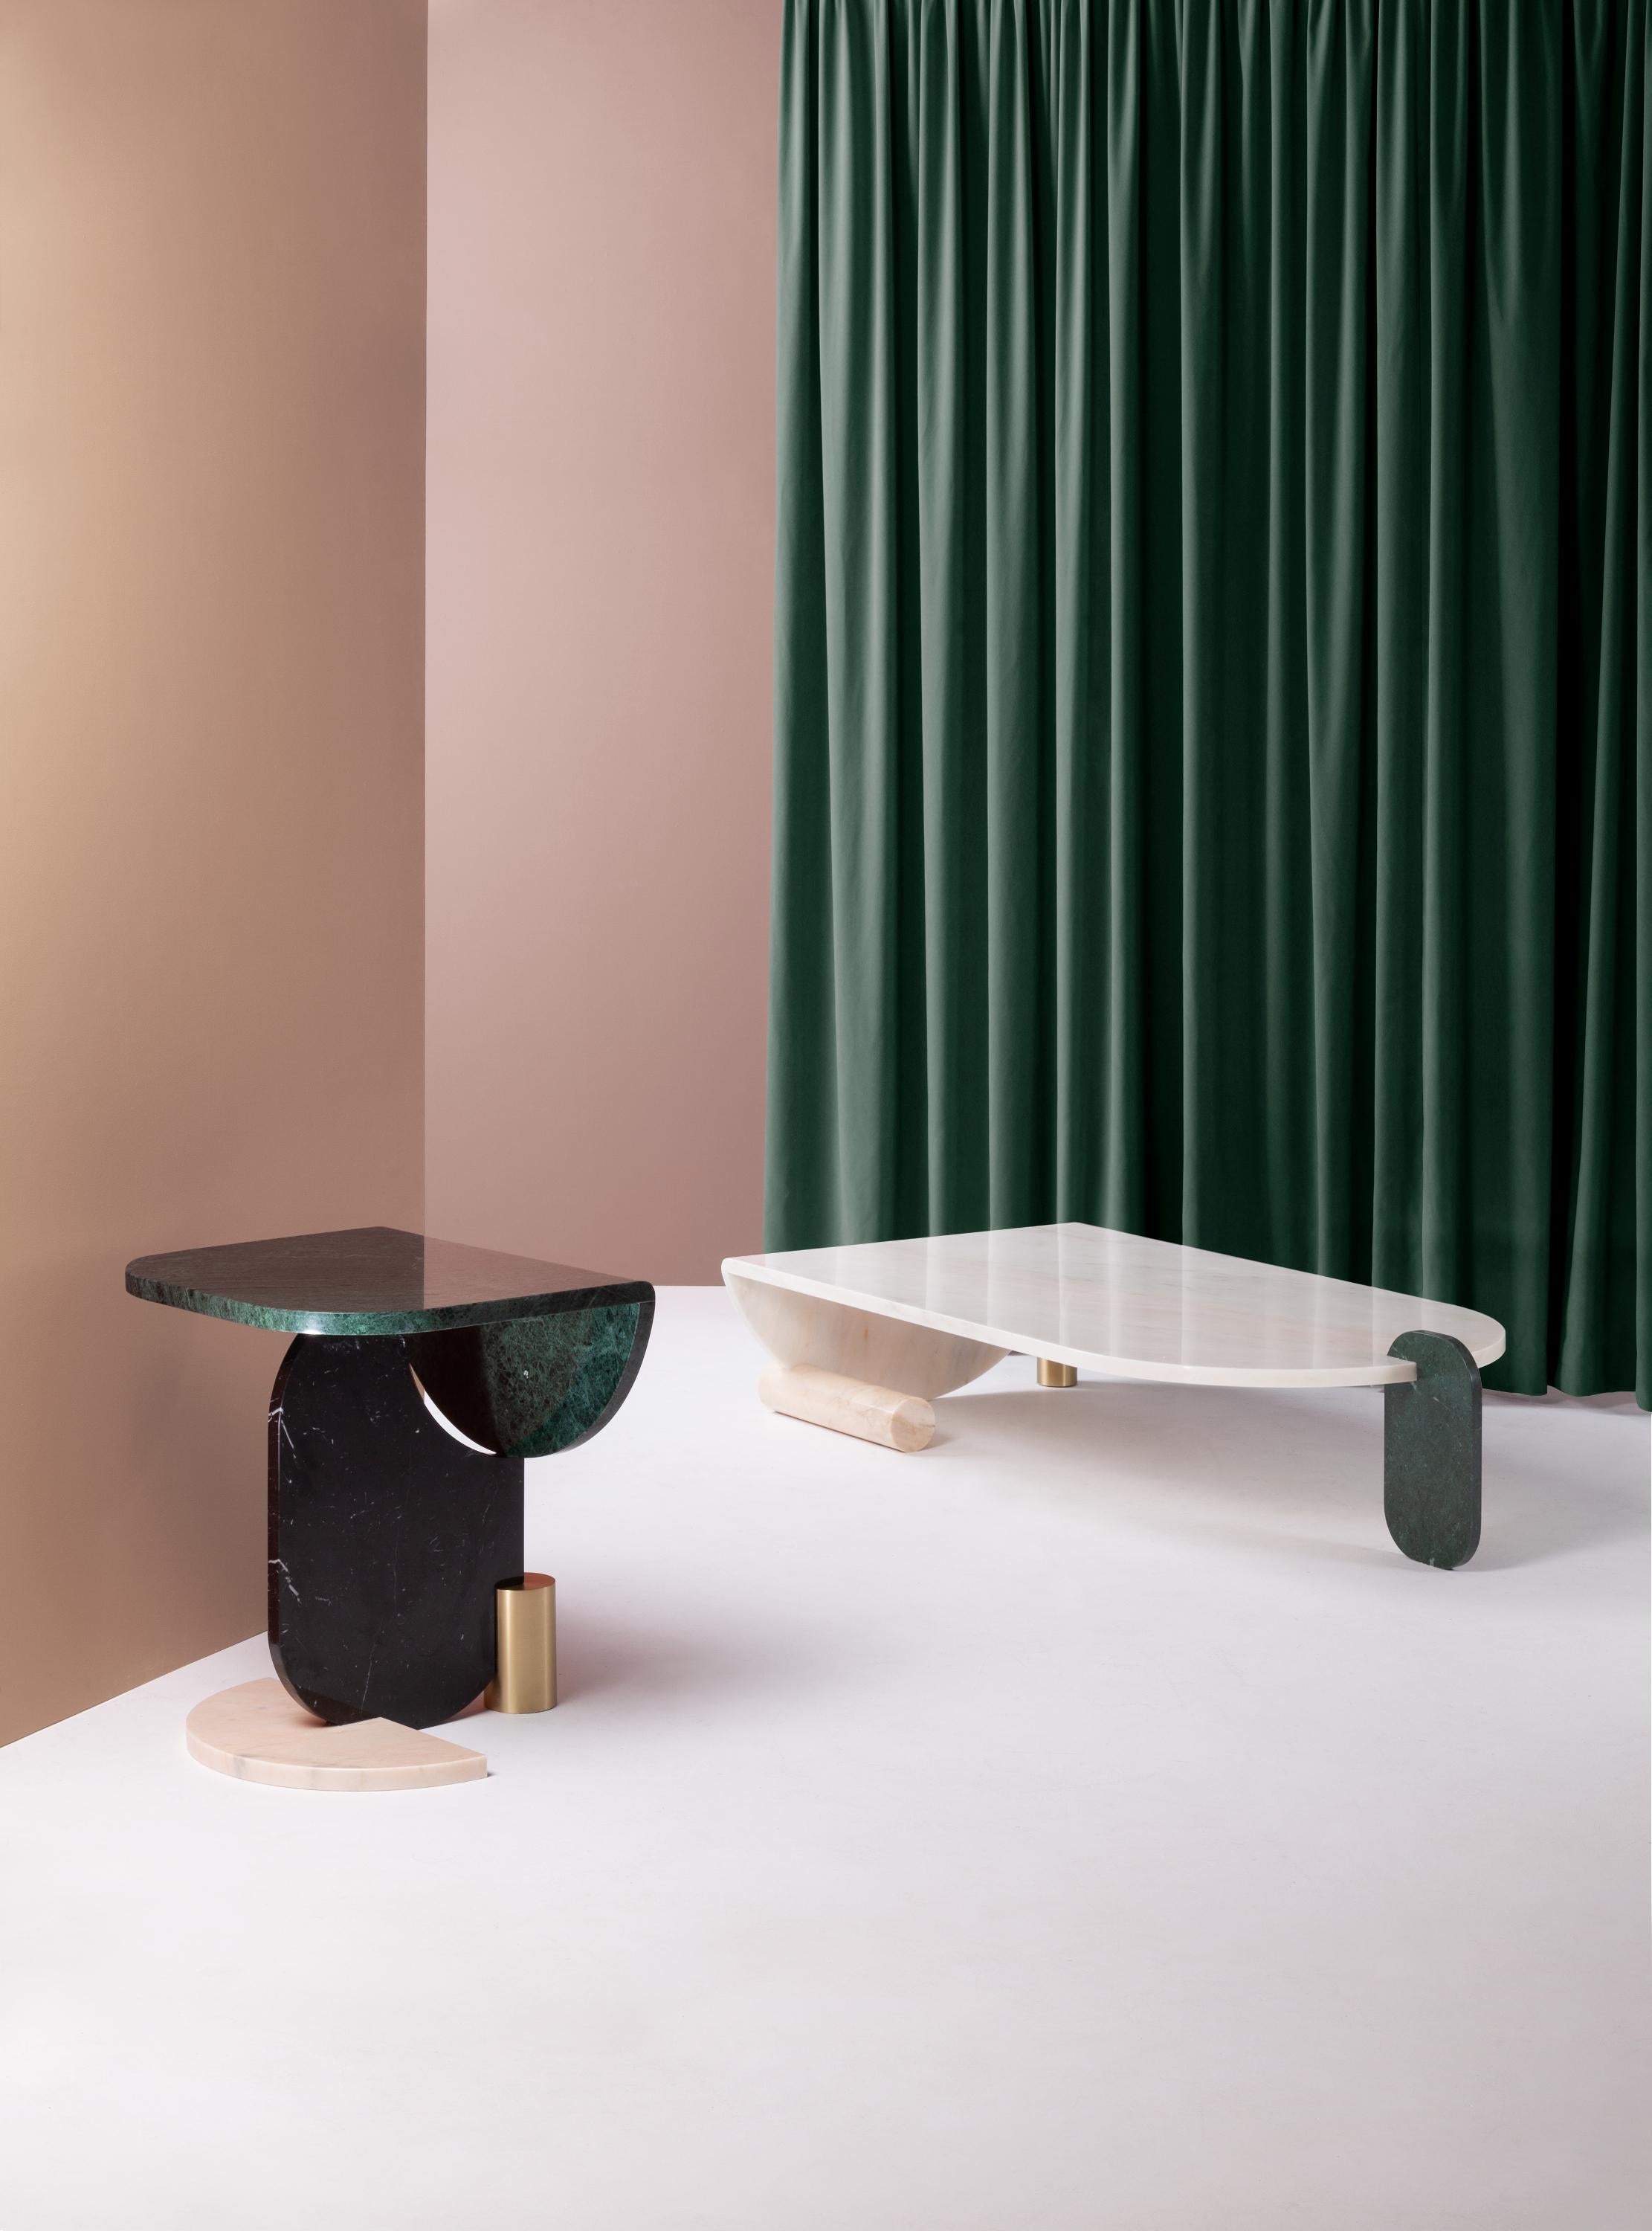 Marble coffee table by Dooq
Measures: W 168 cm 71”
D 80 cm 32”
H 32 cm 13”

Materials: Top marble: Guatemala green, estremoz white,
estremoz rose, Carrara
side and cilindric base marble: Guatemala green,
estremoz white, estremoz rose, Nero